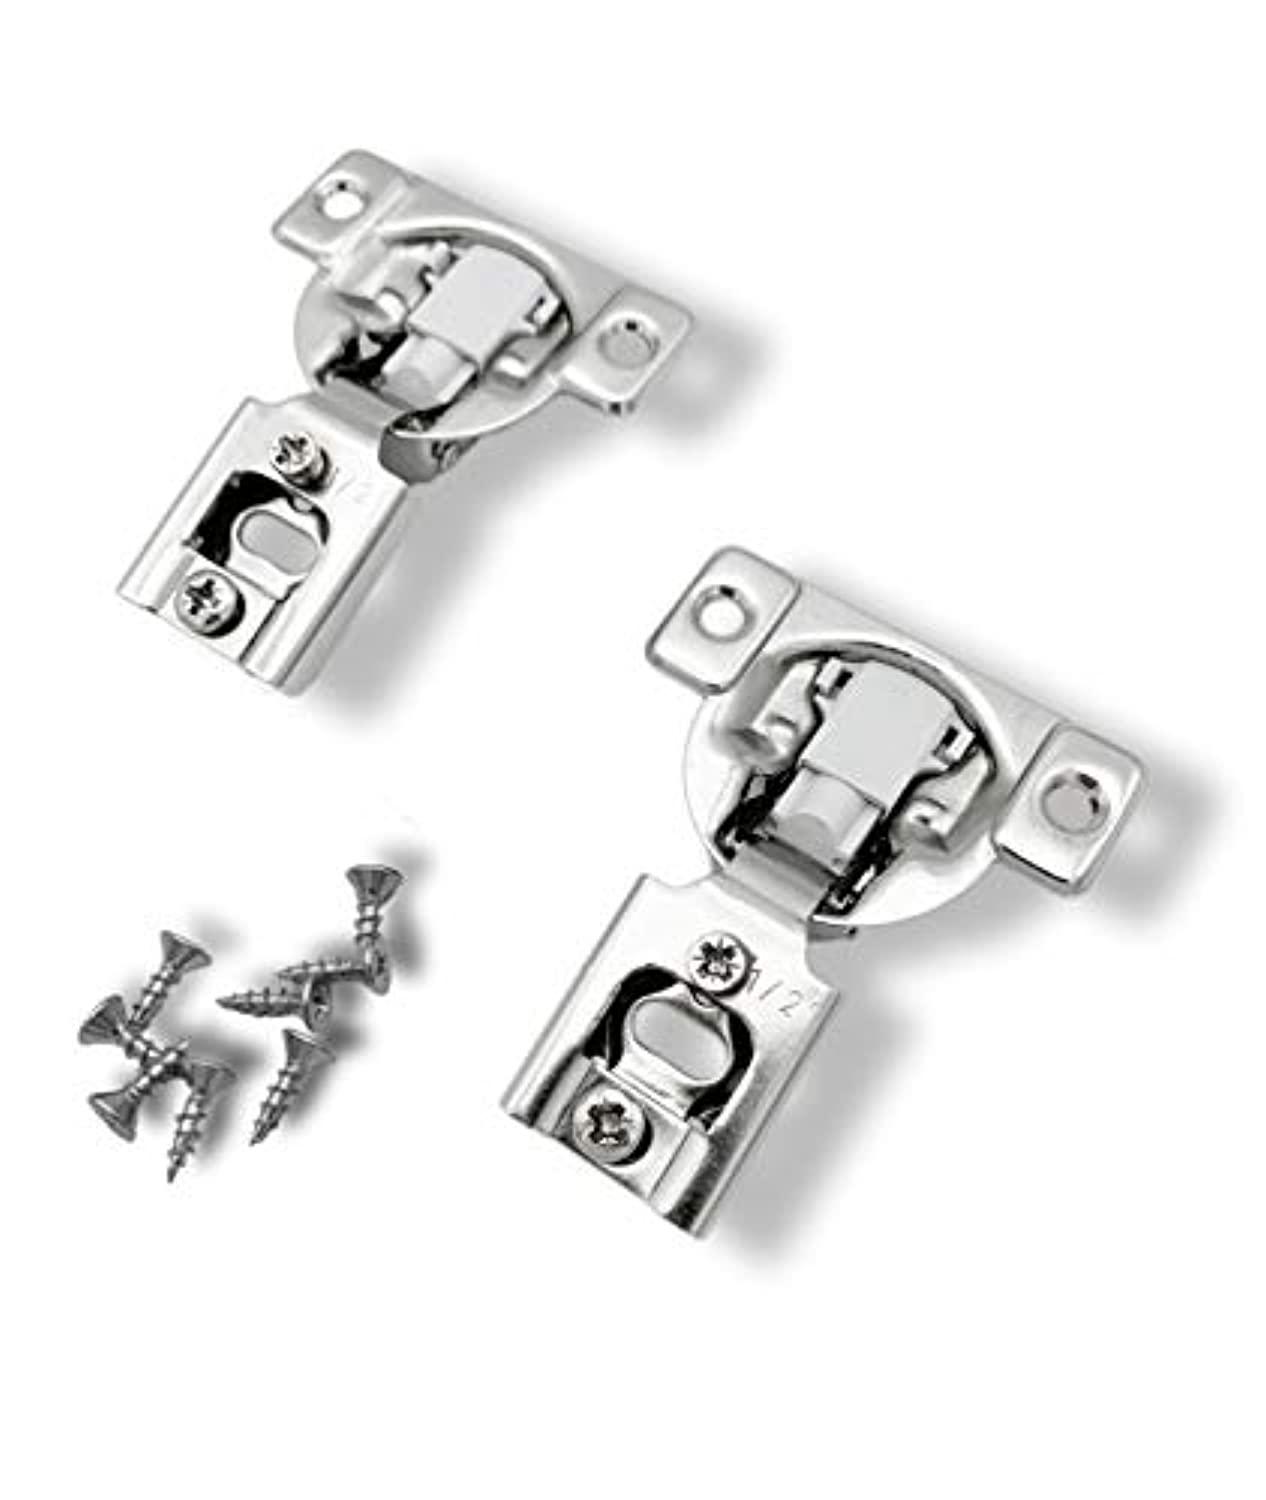 FGV apollo direct (1 pair) concealed 105 degree 1-piece soft close compact hinge 1/2" overlay (pack of 2 hinges)